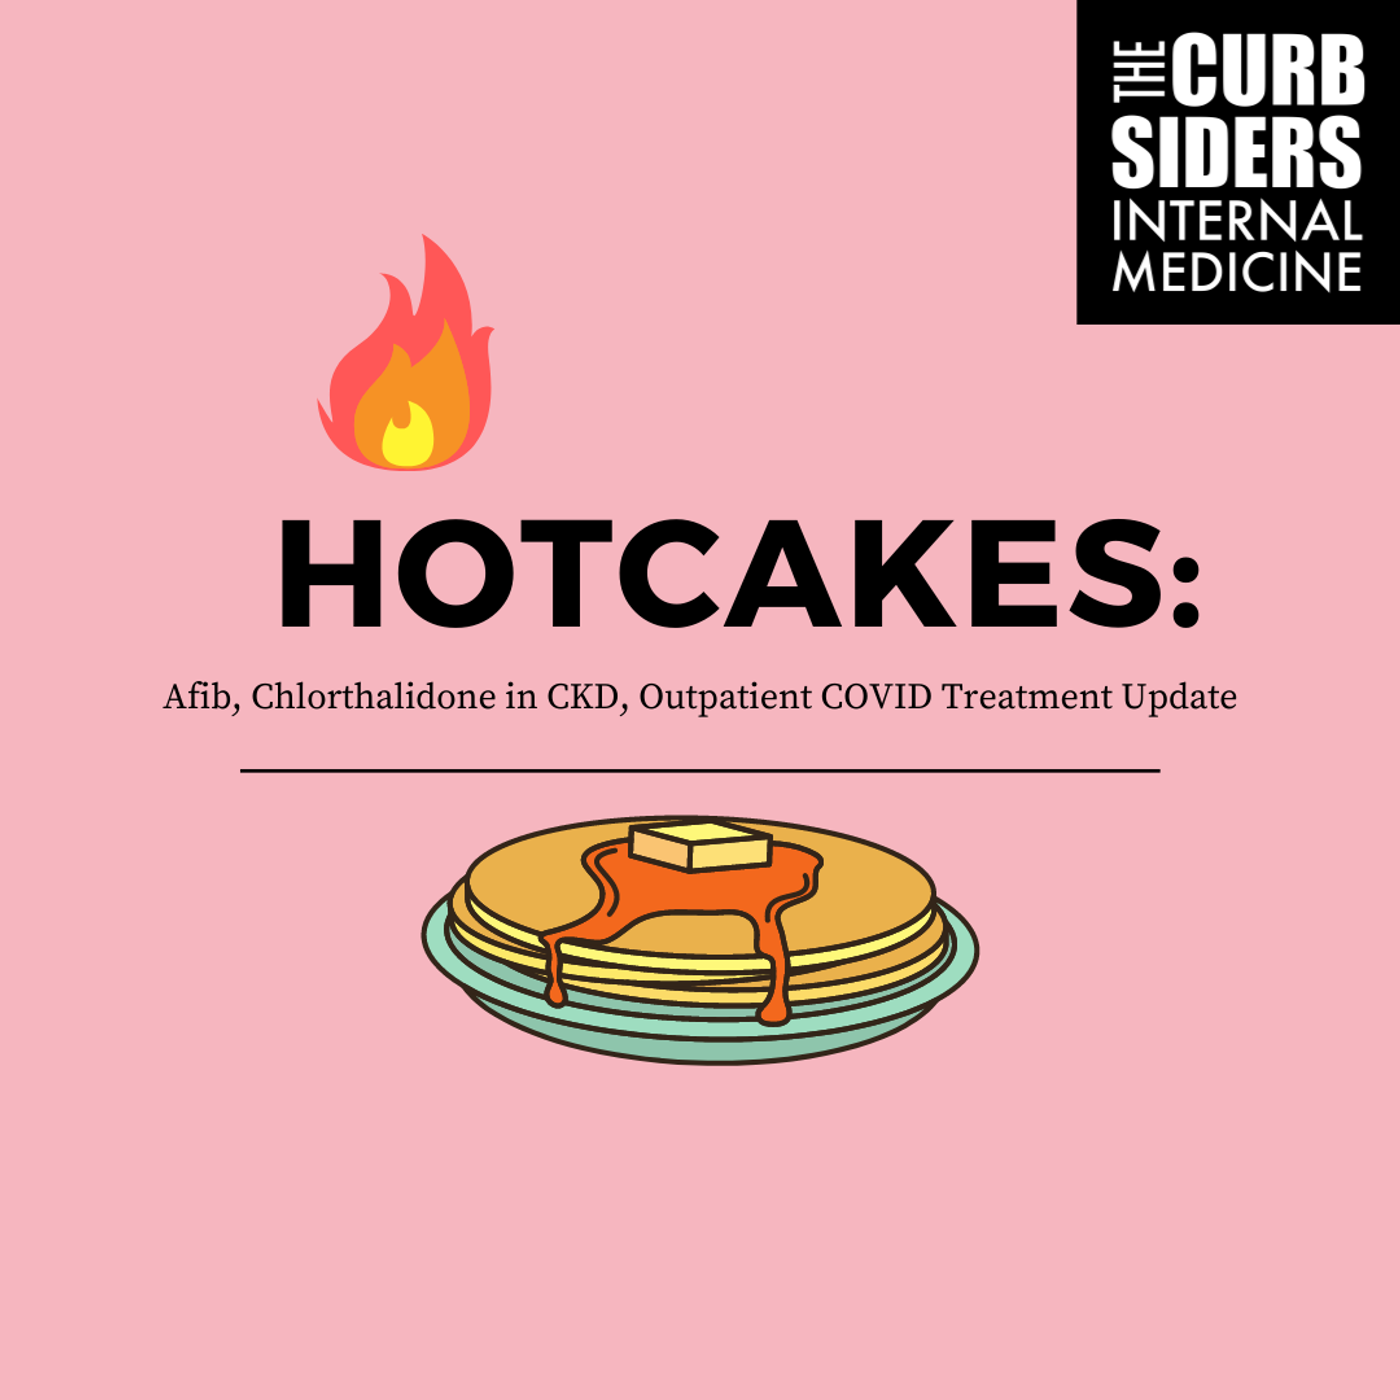 #319 Hotcakes: Afib, Chlorthalidone in CKD, Outpatient COVID Treatment Update